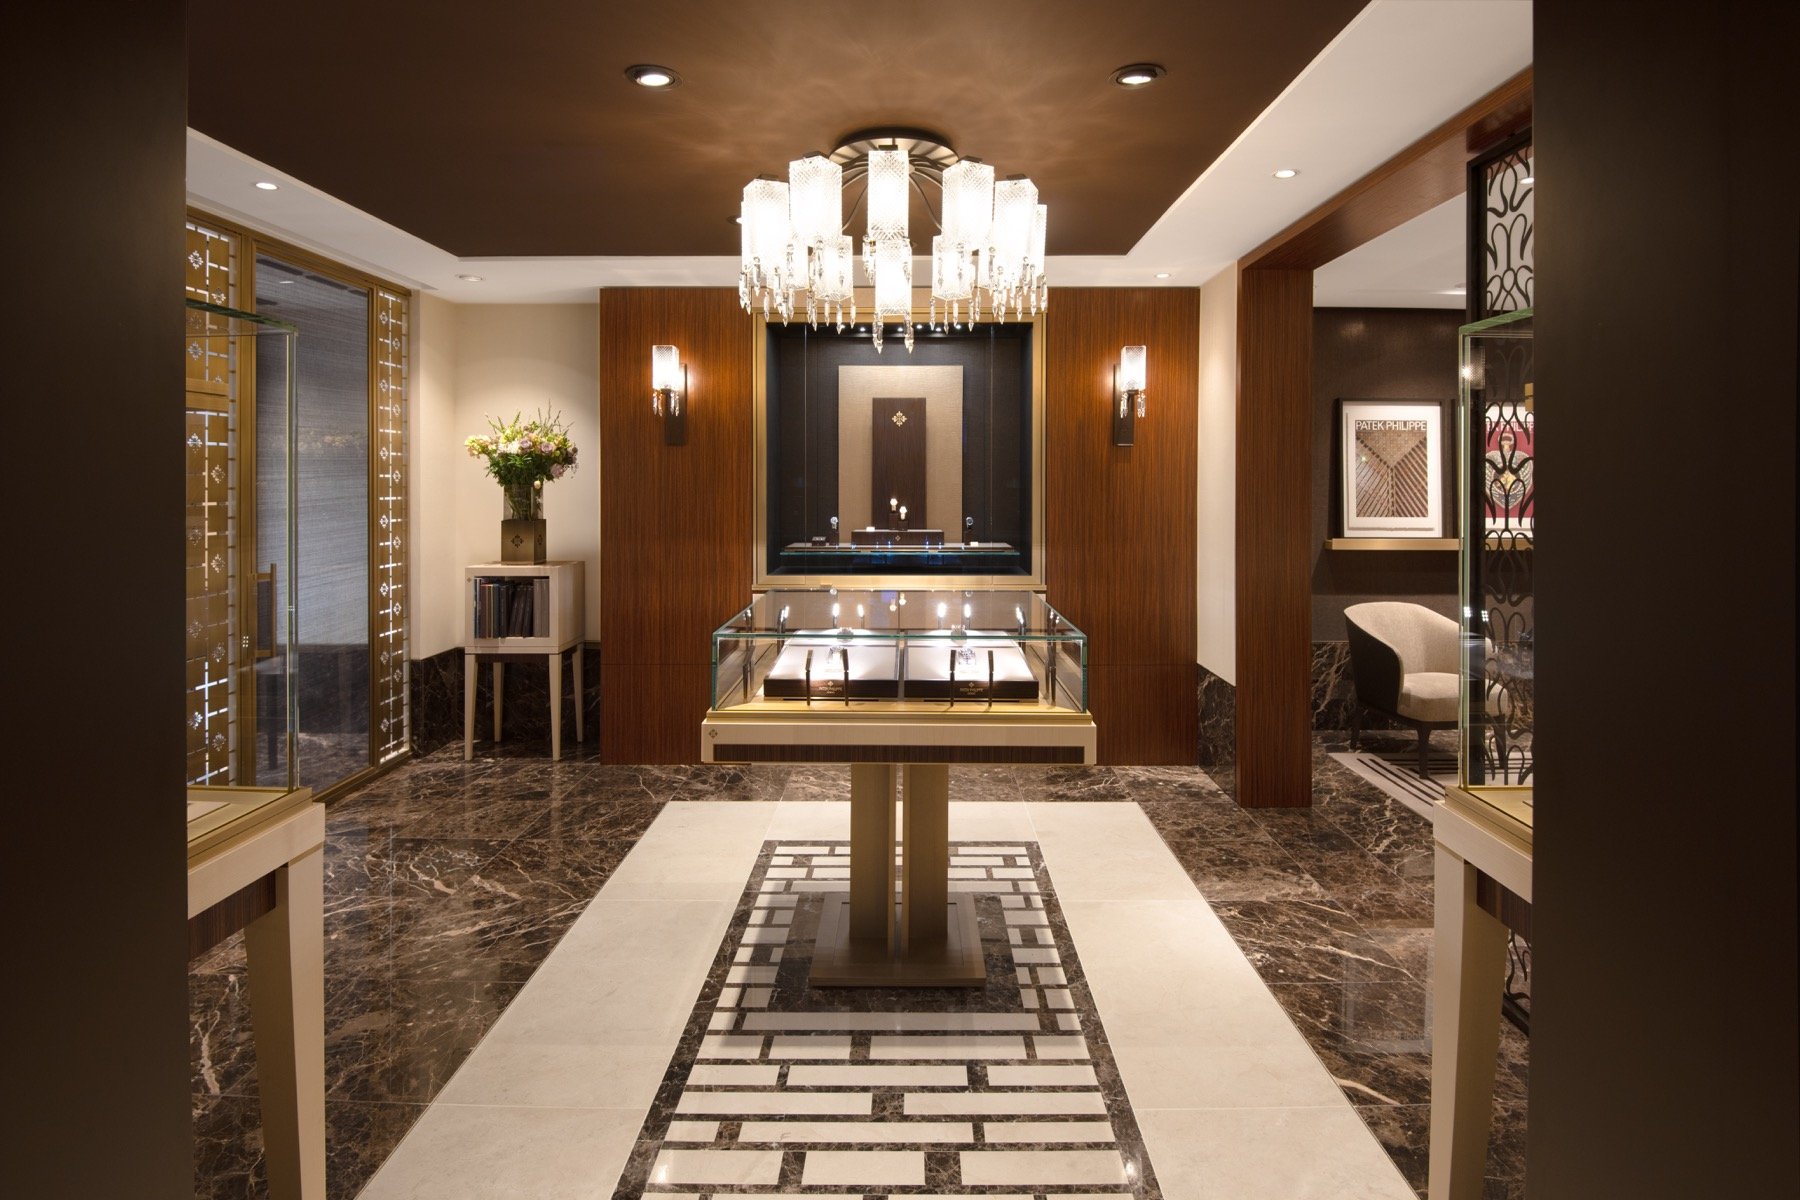 @prestons1869 Expands Patek Philippe Presence in Wilmslow ⌚️ The Cheshire Magazine takes an exclusive tour of Prestons Wilmslow&rsquo;s new Patek Philippe space, celebrating a friendship between this iconic watch brand and the Cheshire-based jeweller